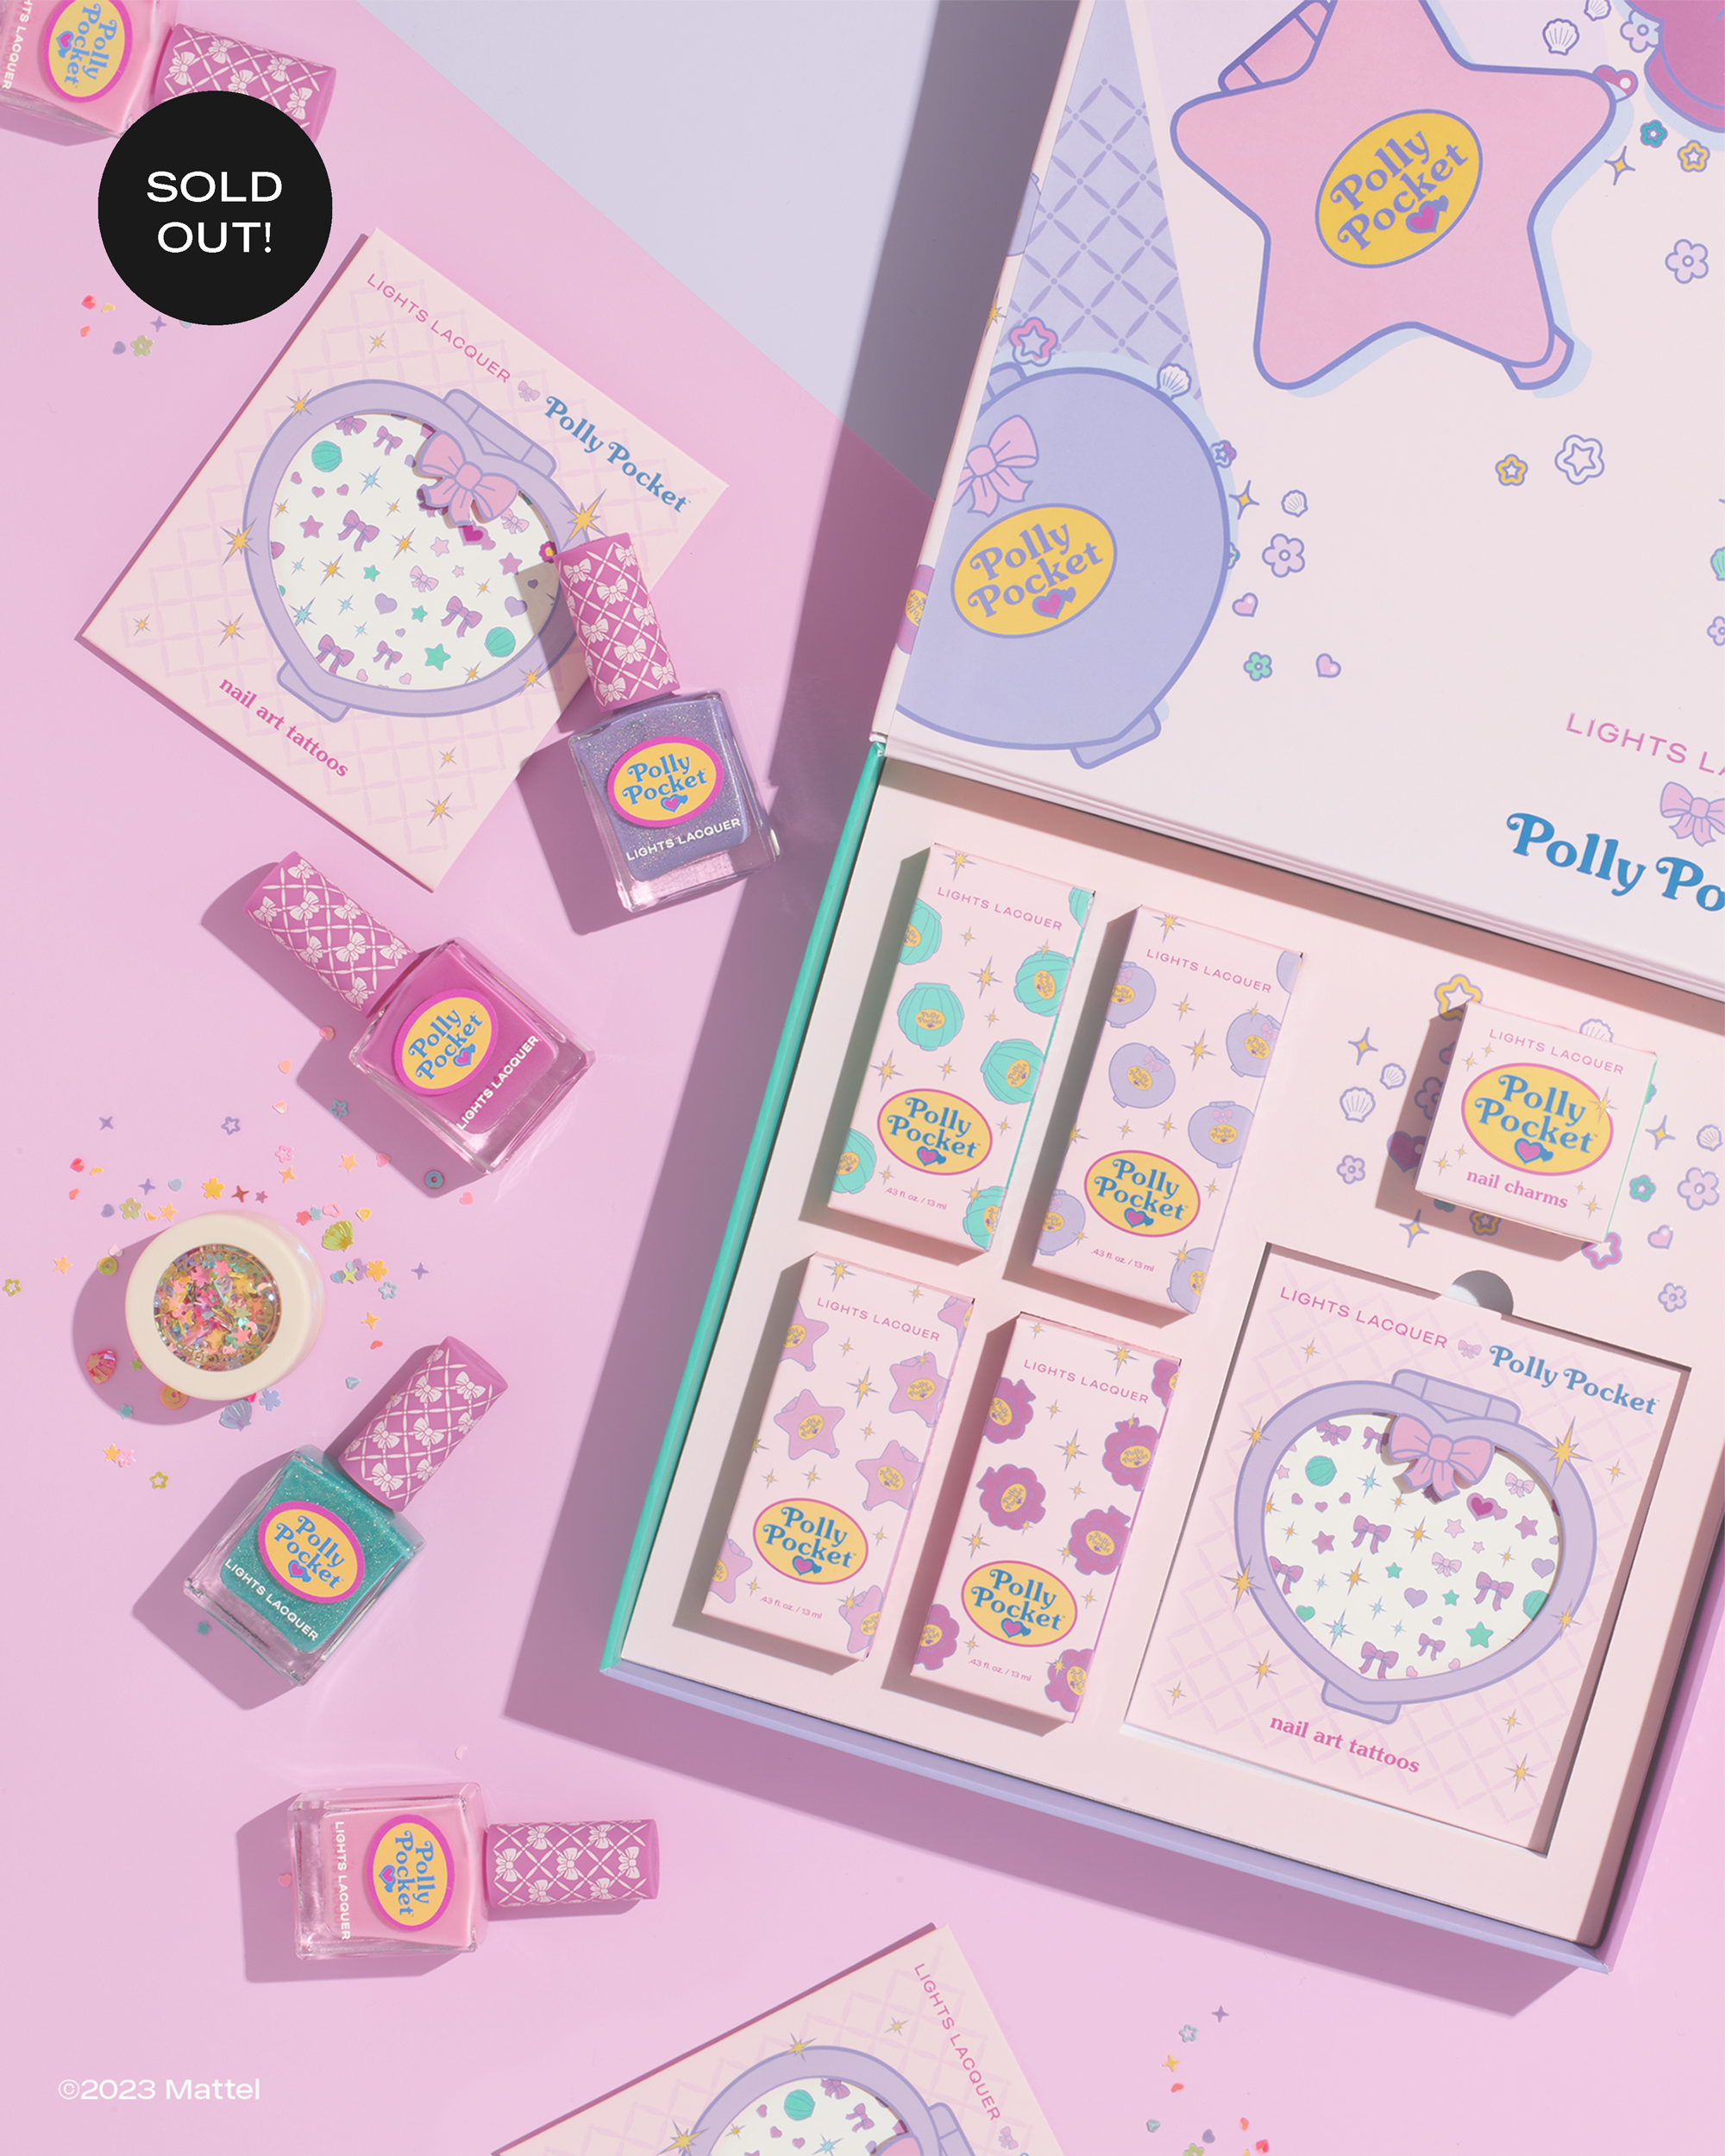 Zeeslak Efficiënt Sinis Polly Pocket™ x Lights Lacquer Collector's Edition